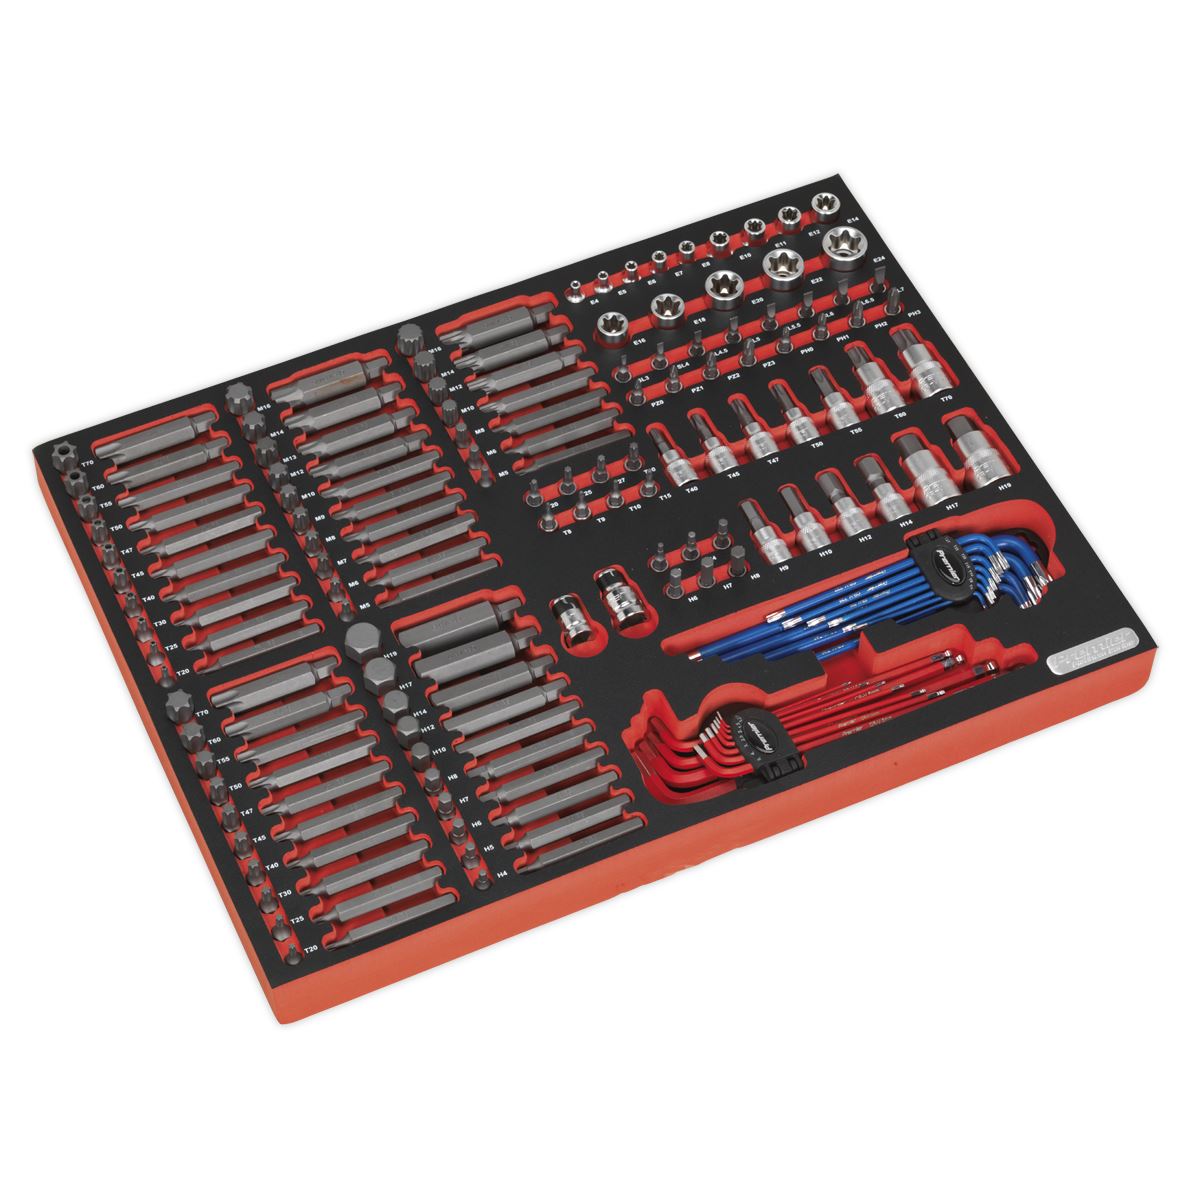 Sealey Premier Tool Tray with Specialised Bits & Sockets 177pc